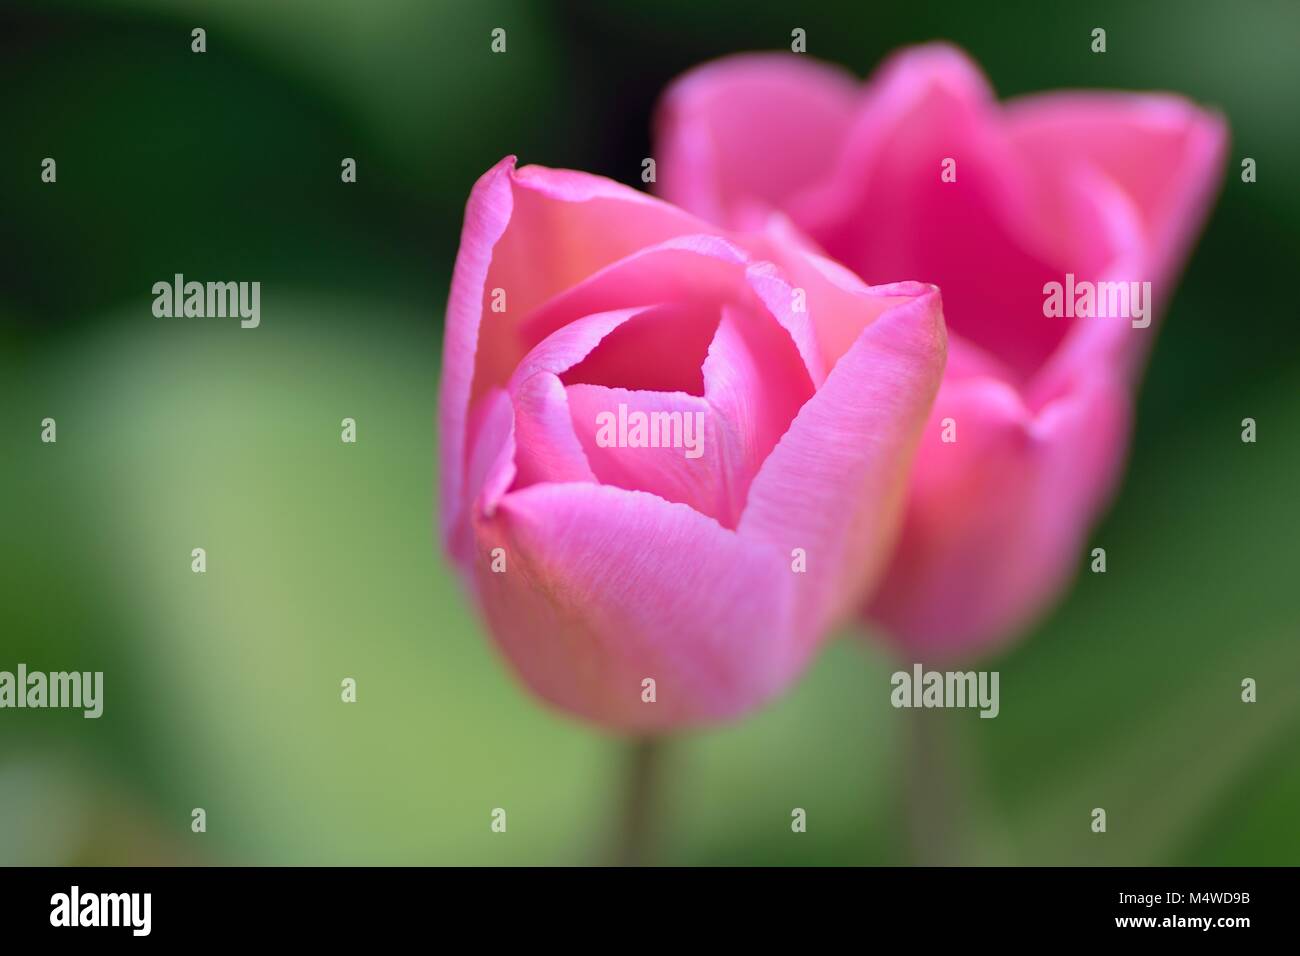 Macro background of pink colored spring Tulip flowers Stock Photo